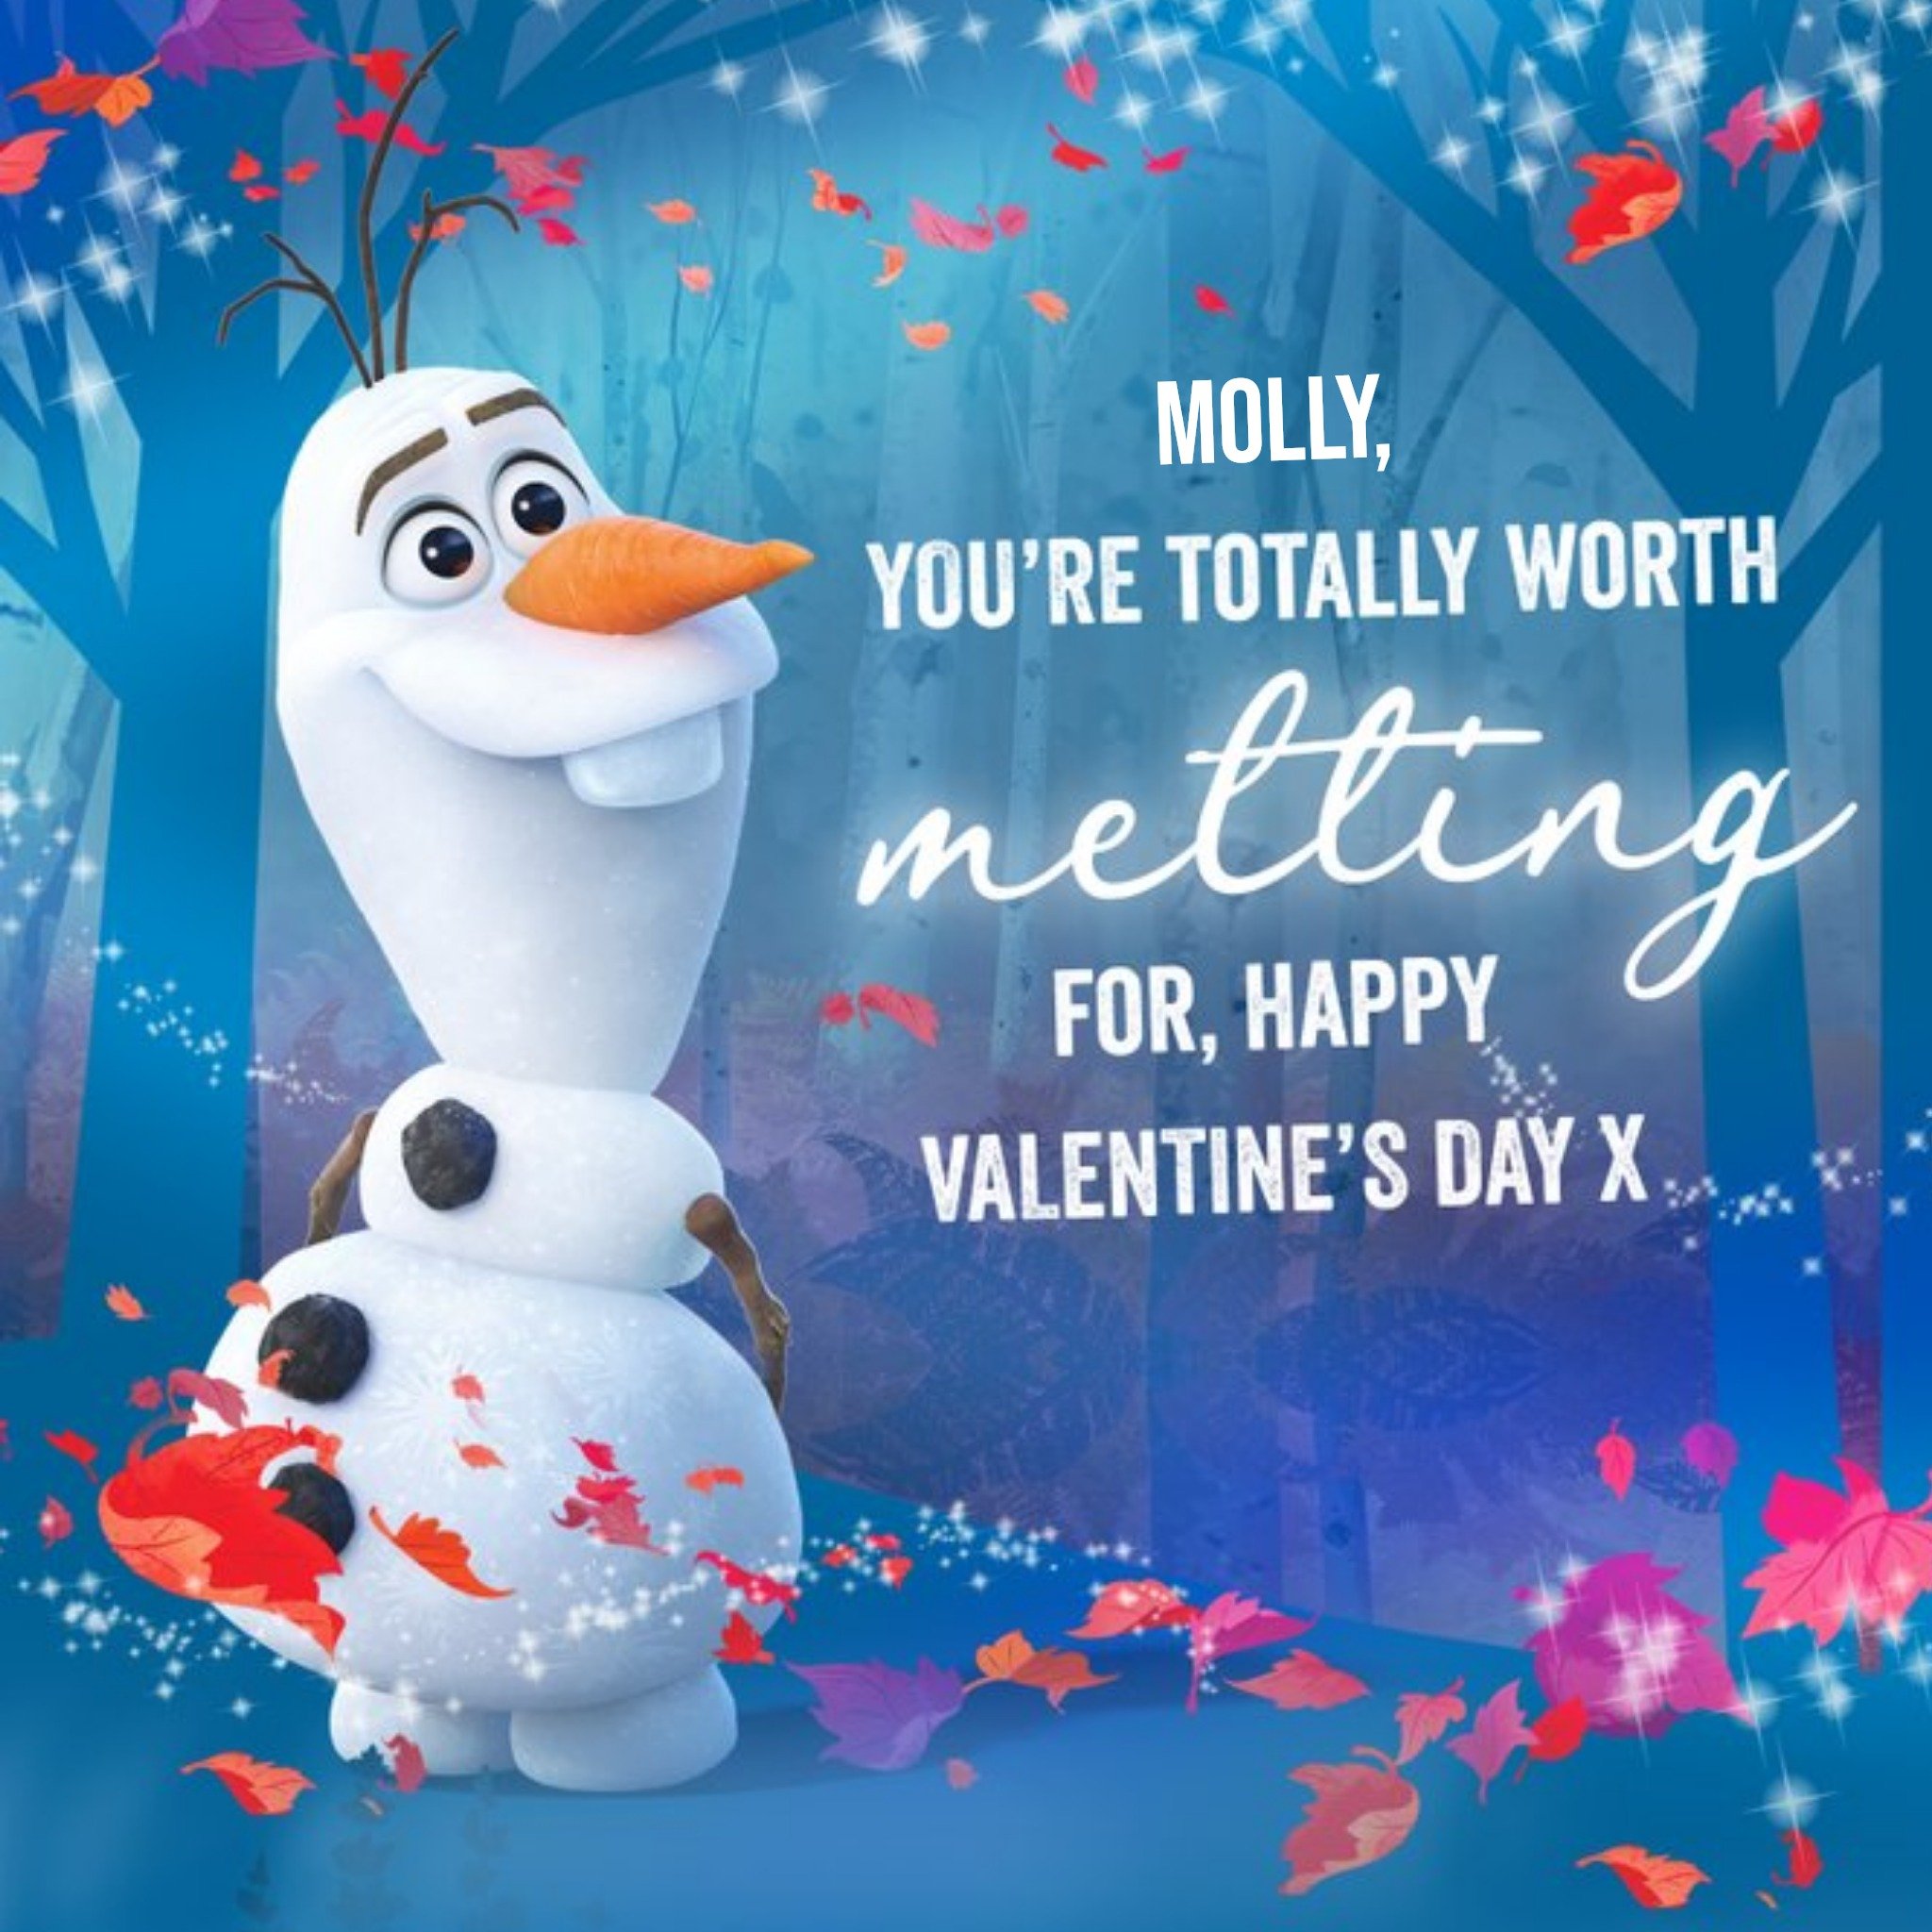 Disney Frozen 2 Olaf You're Worth Melting For Valentine's Day Card, Large